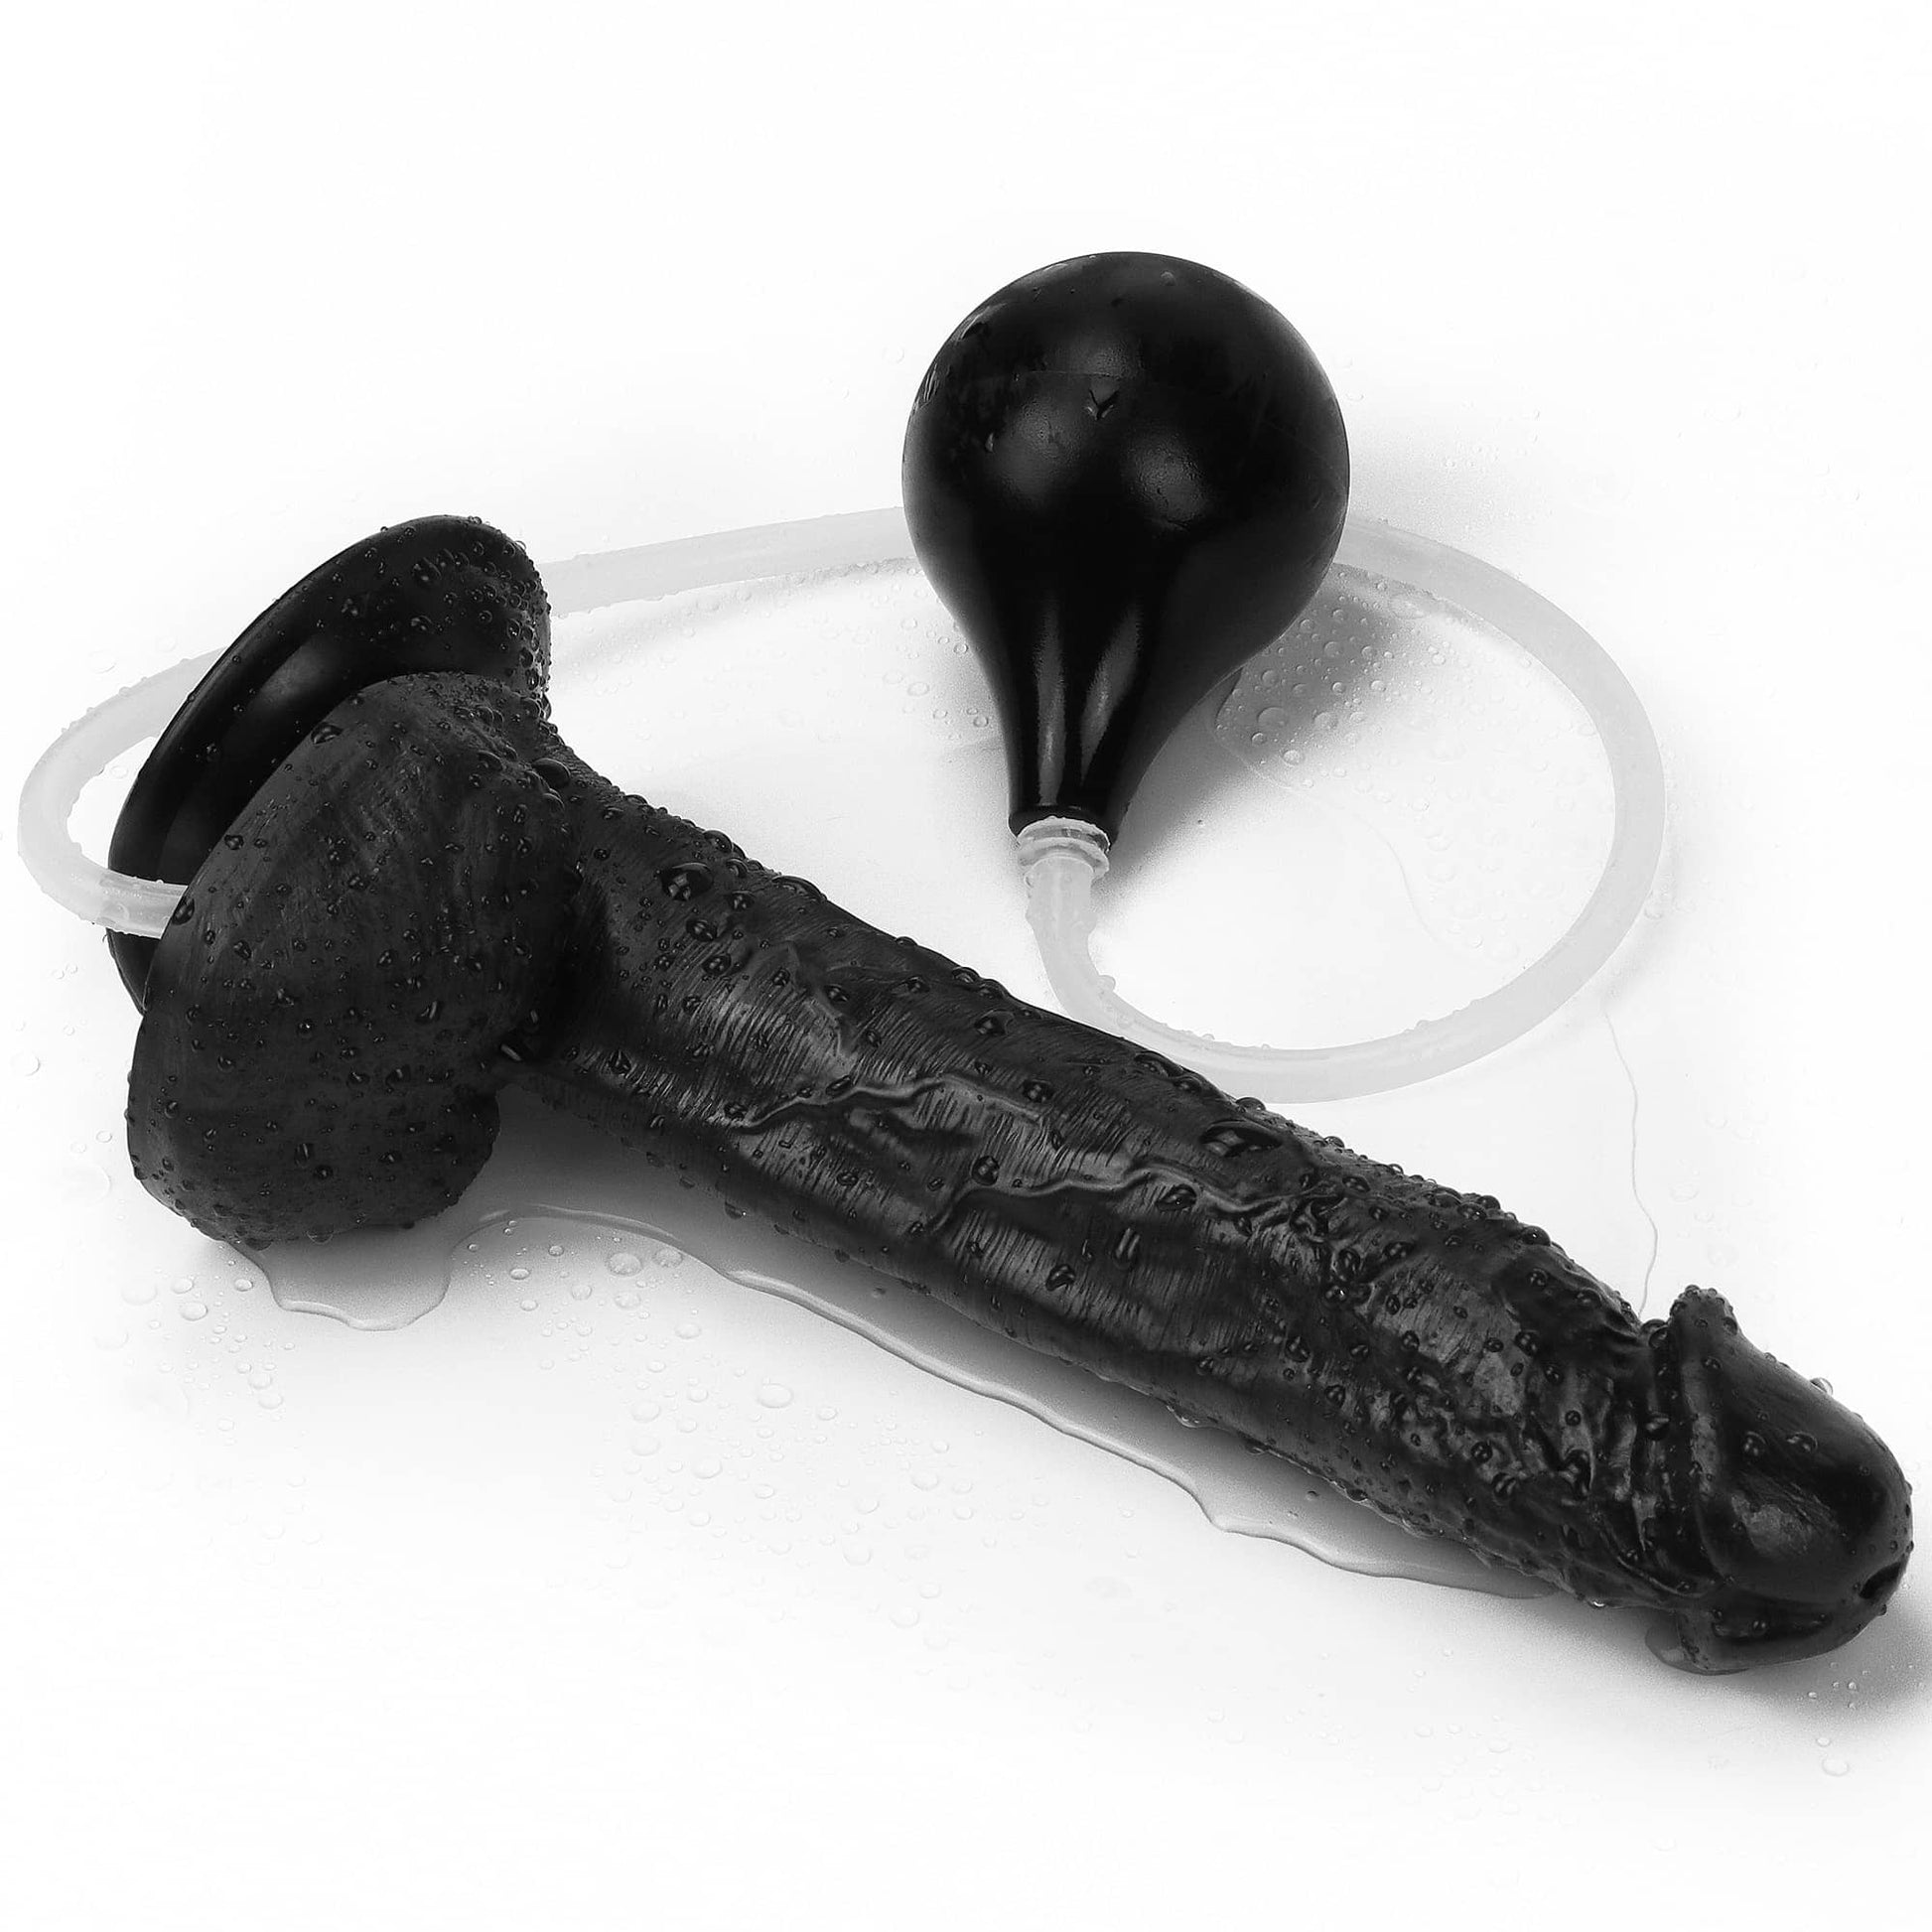 The 11 inches black realistic ejaculating dildo is shown lying flat